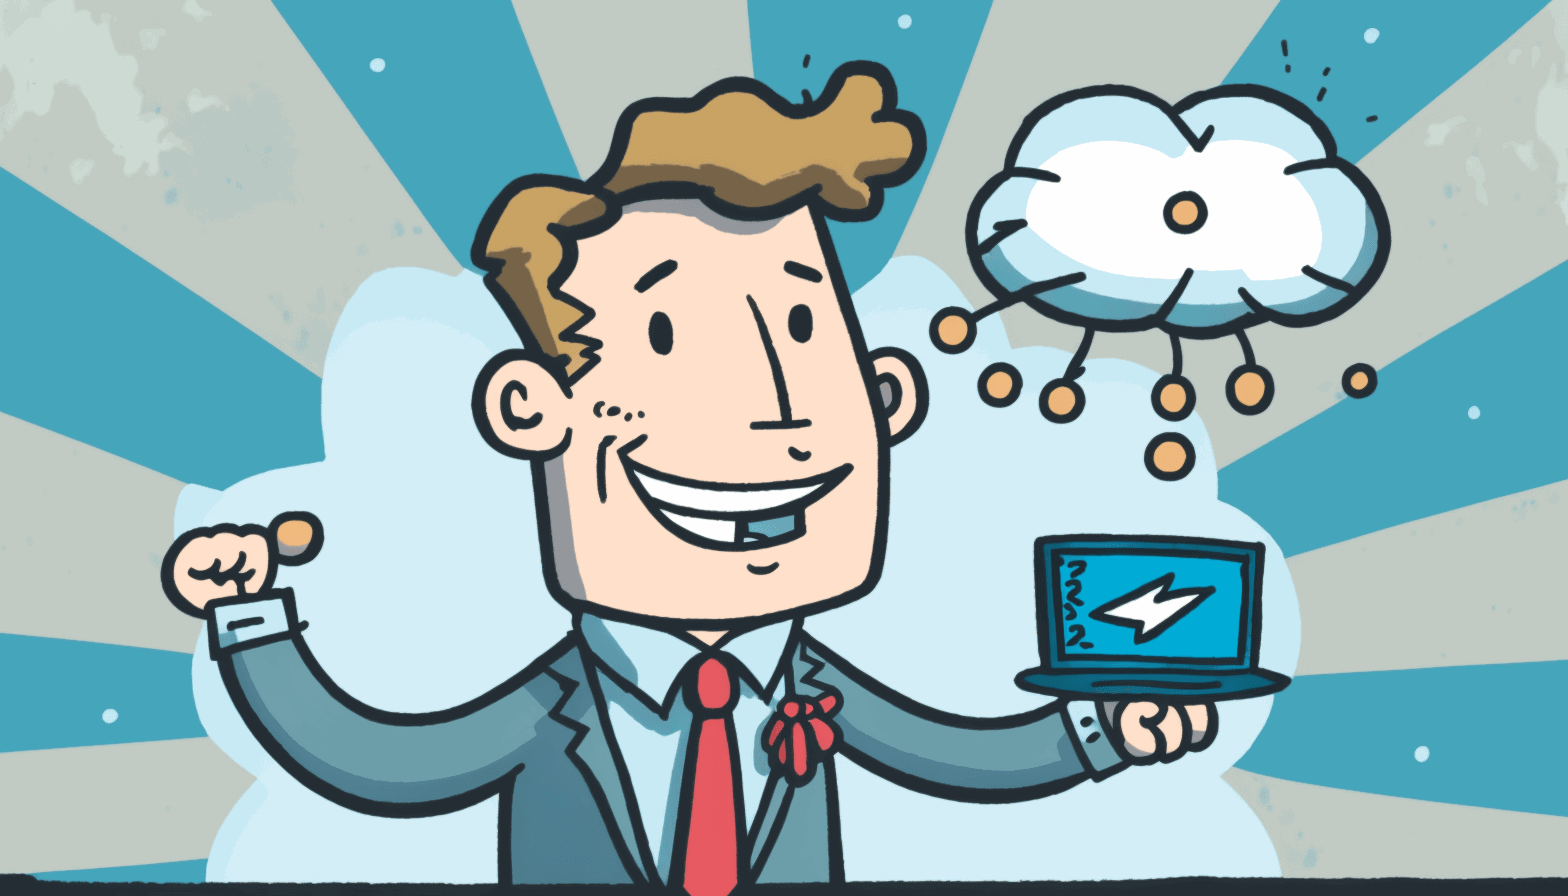 A cartoon-style image of a smiling graduate holding a laptop and a certificate while standing in front of a computer server with clouds in the background, representing the connection between cloud computing and career advancement.